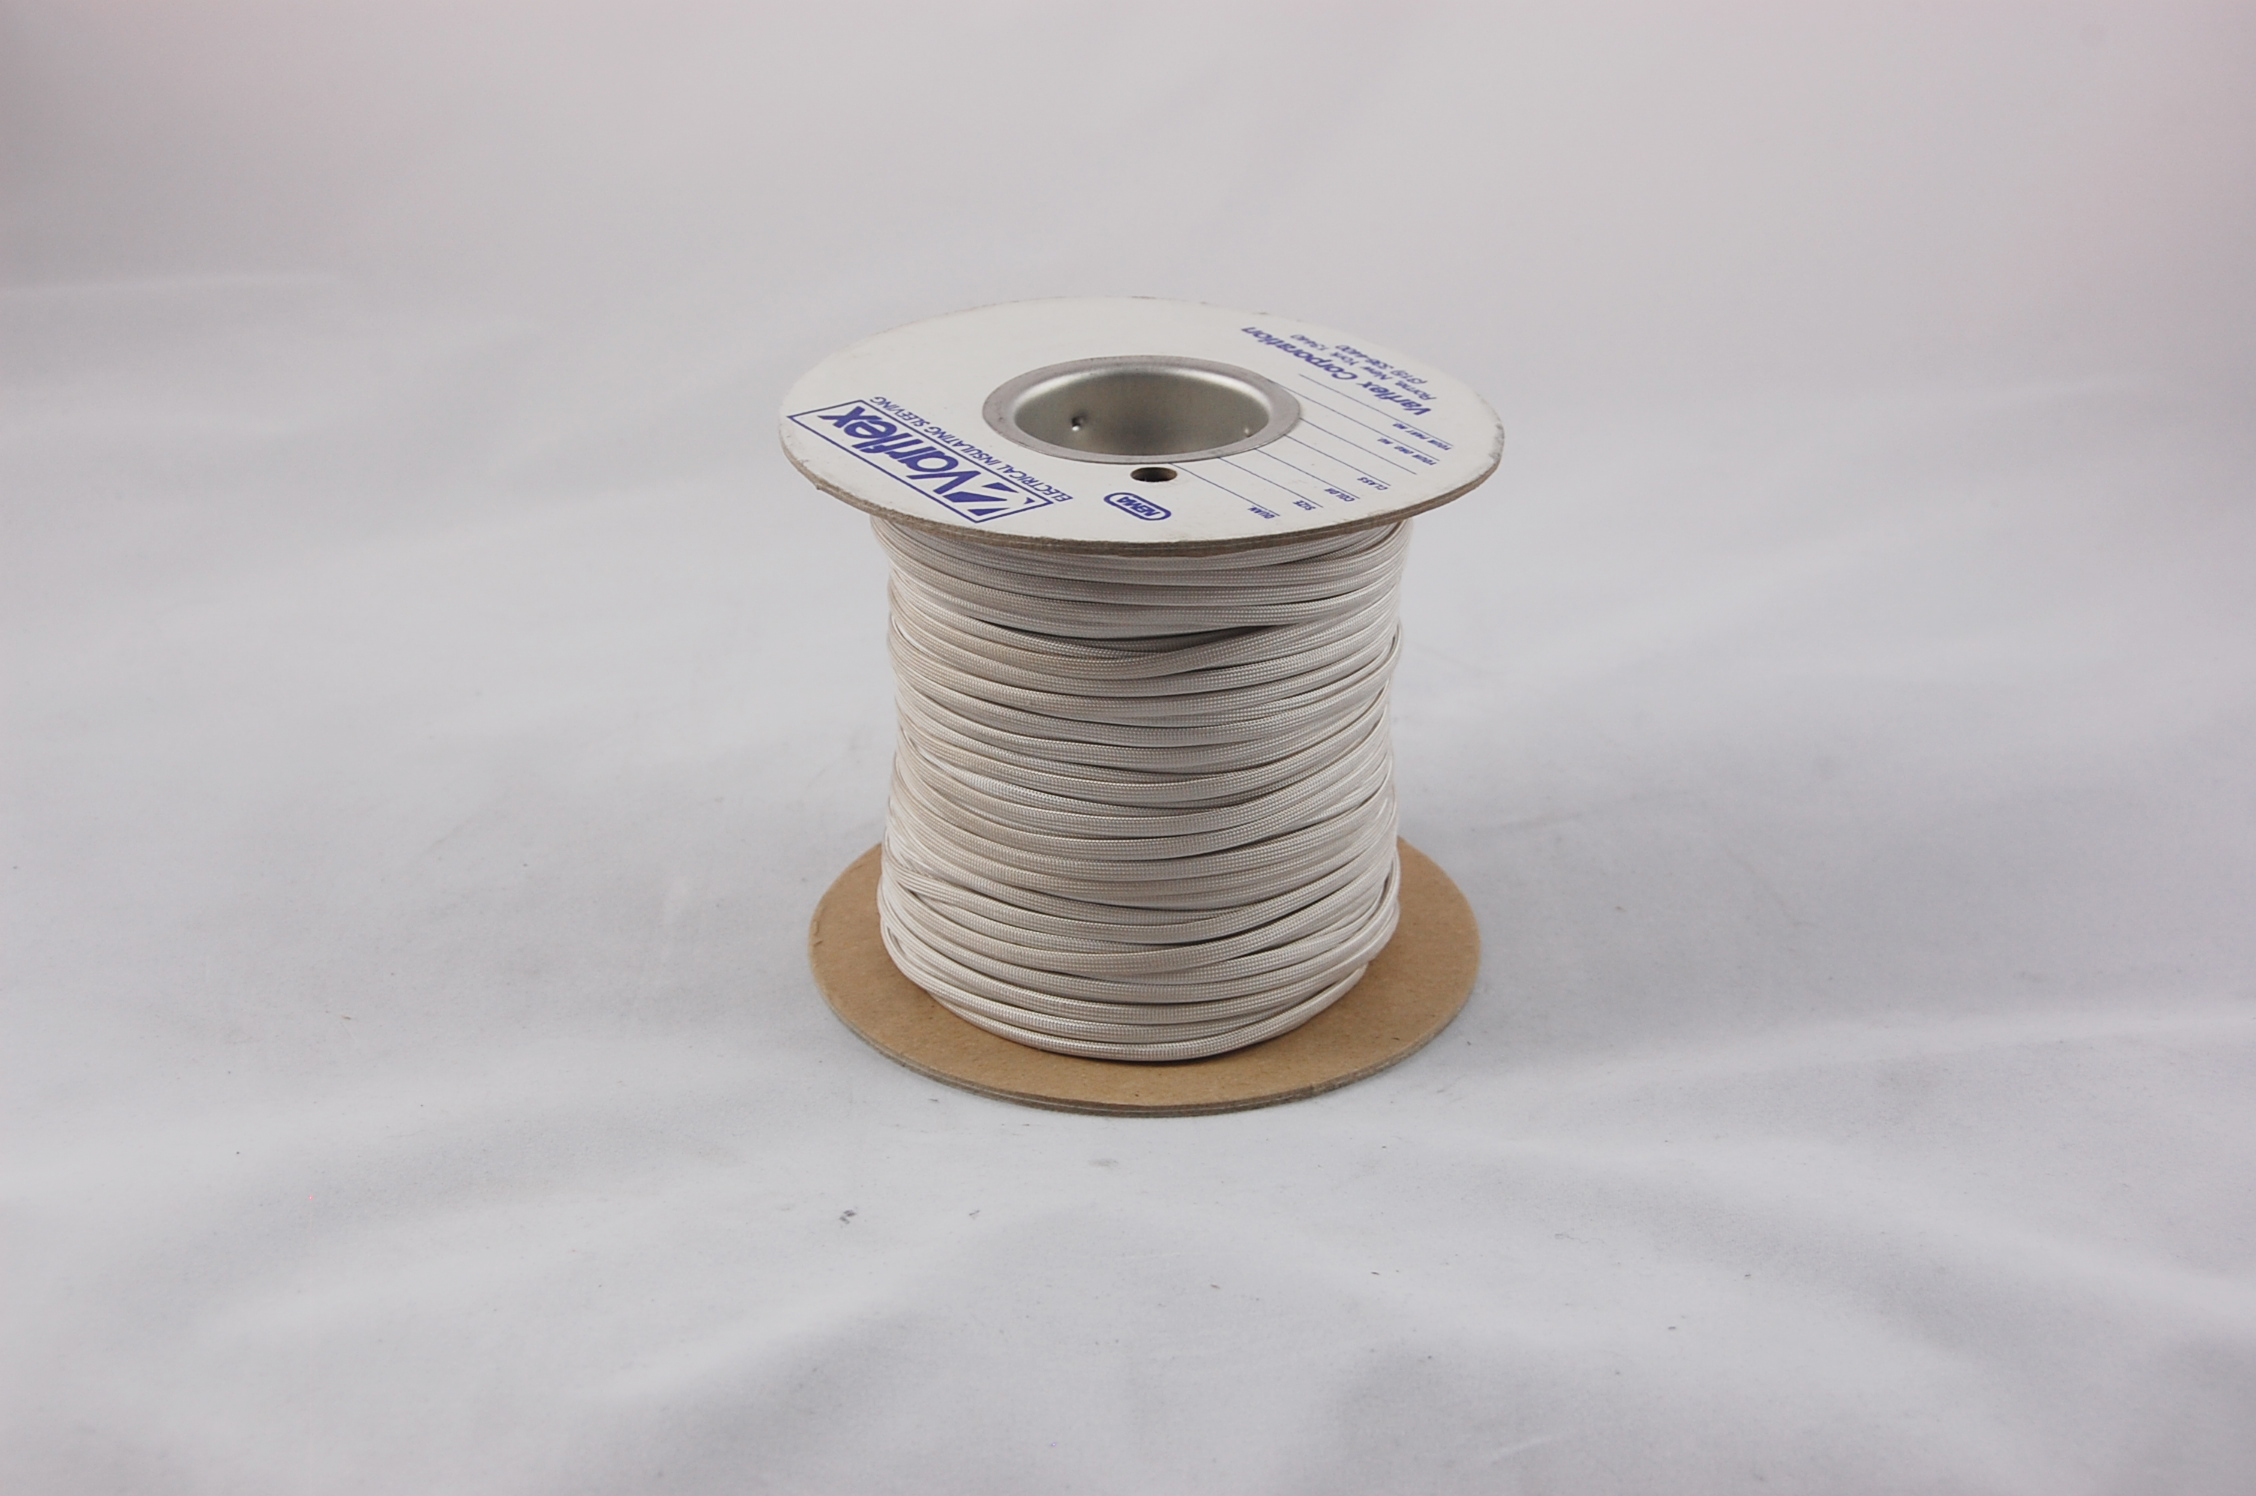 1/2" AWG Varglas Type H Heat-Cleaned High Temperature Non-Fray Flexible Fiberglass Sleeving , natural, 100 FT per spool